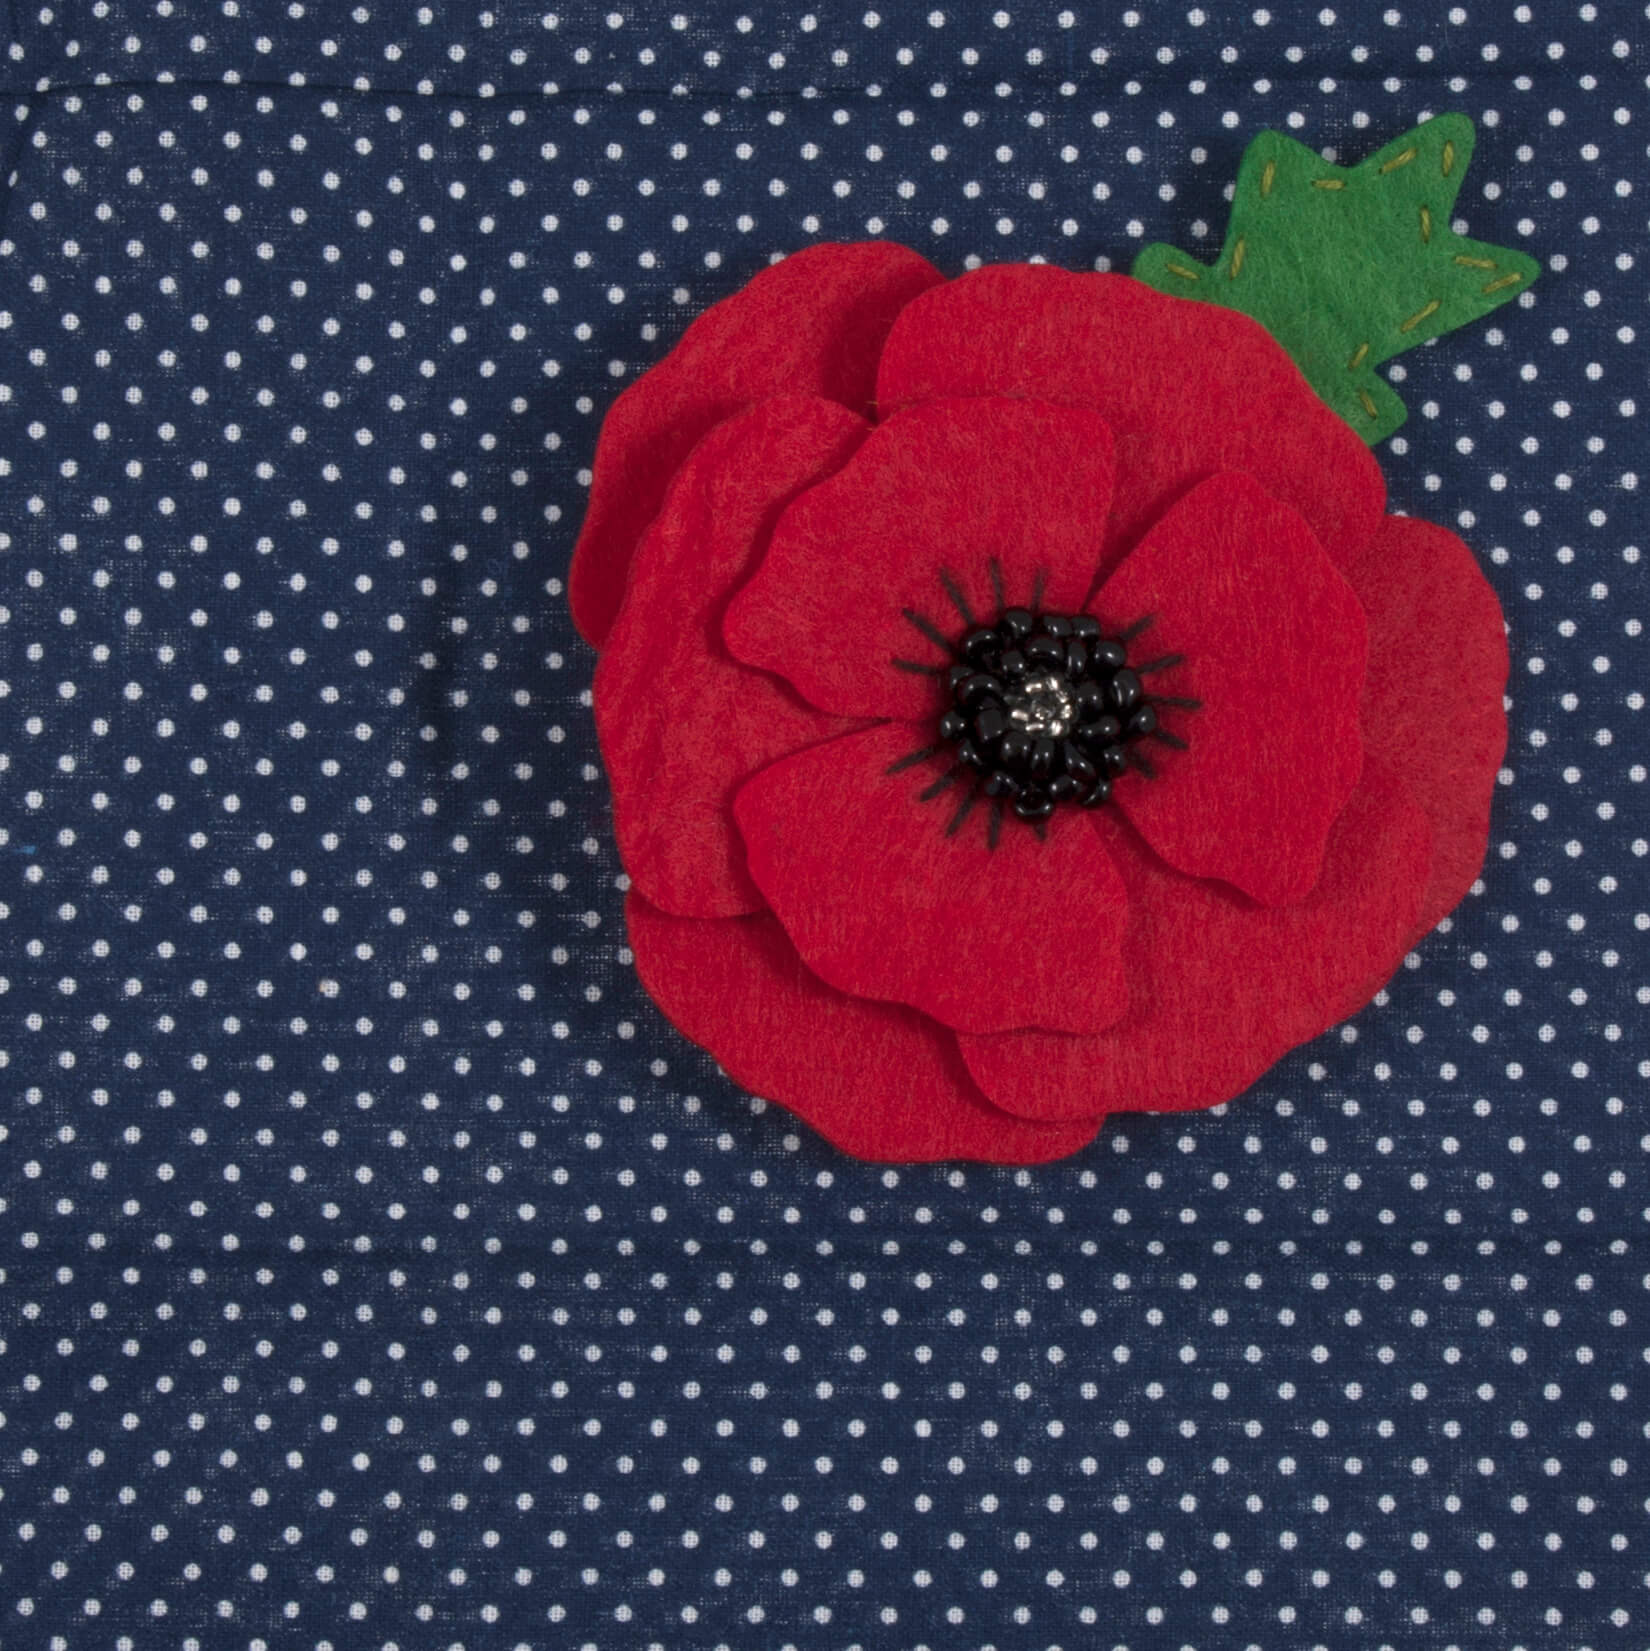 The image shows a red felt poppy on a blue polka dot background.